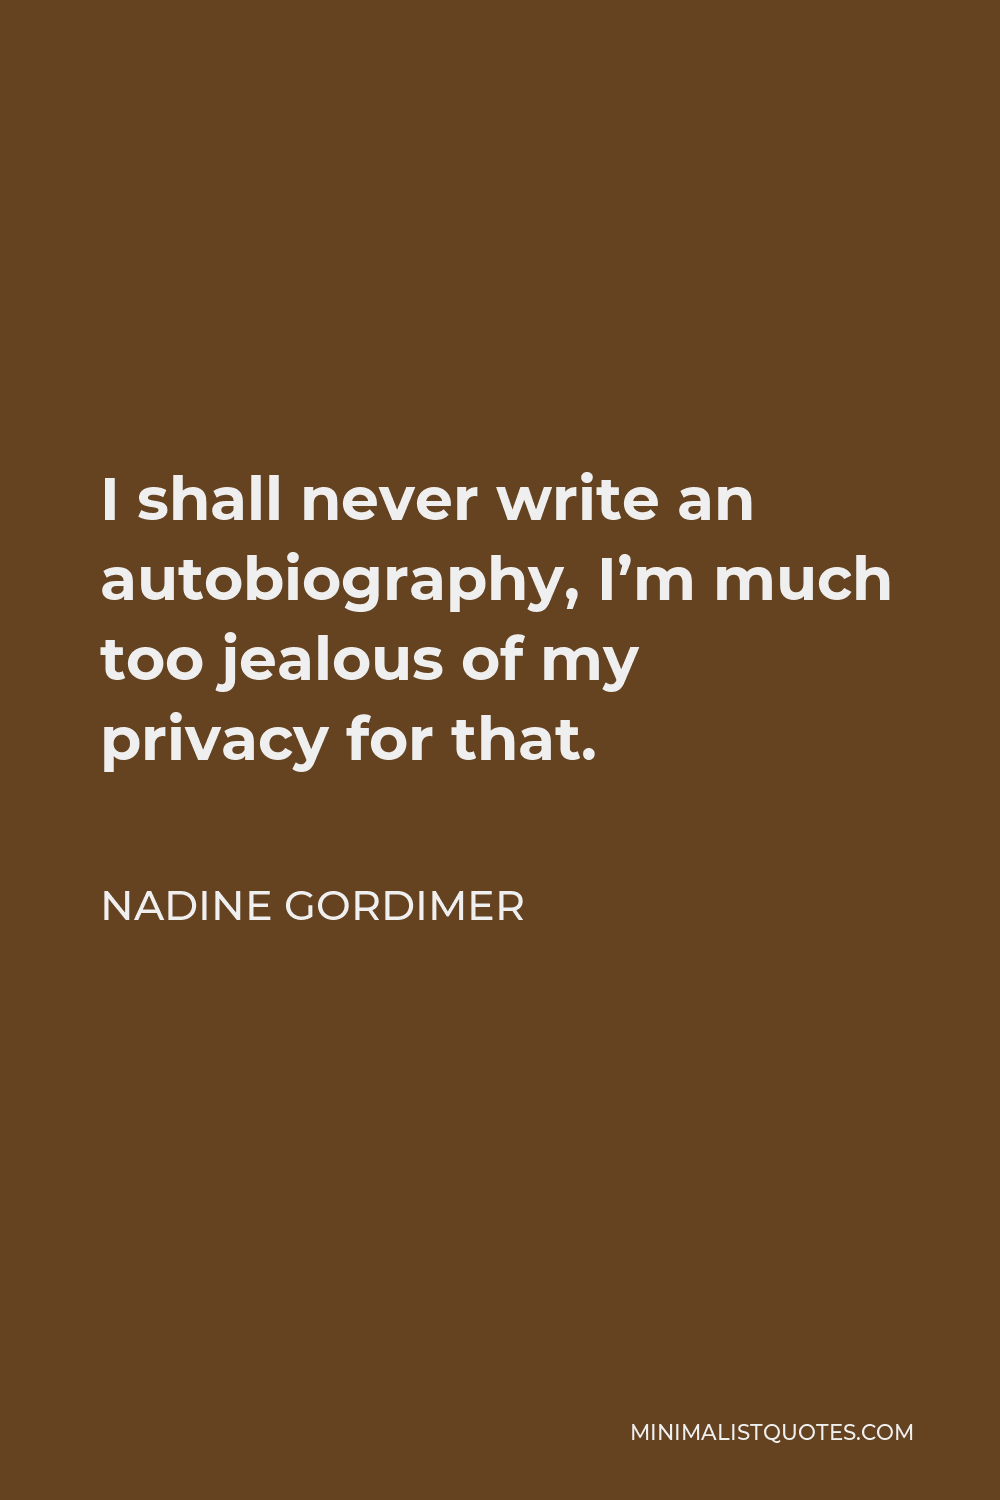 Nadine Gordimer Quote - I shall never write an autobiography, I’m much too jealous of my privacy for that.